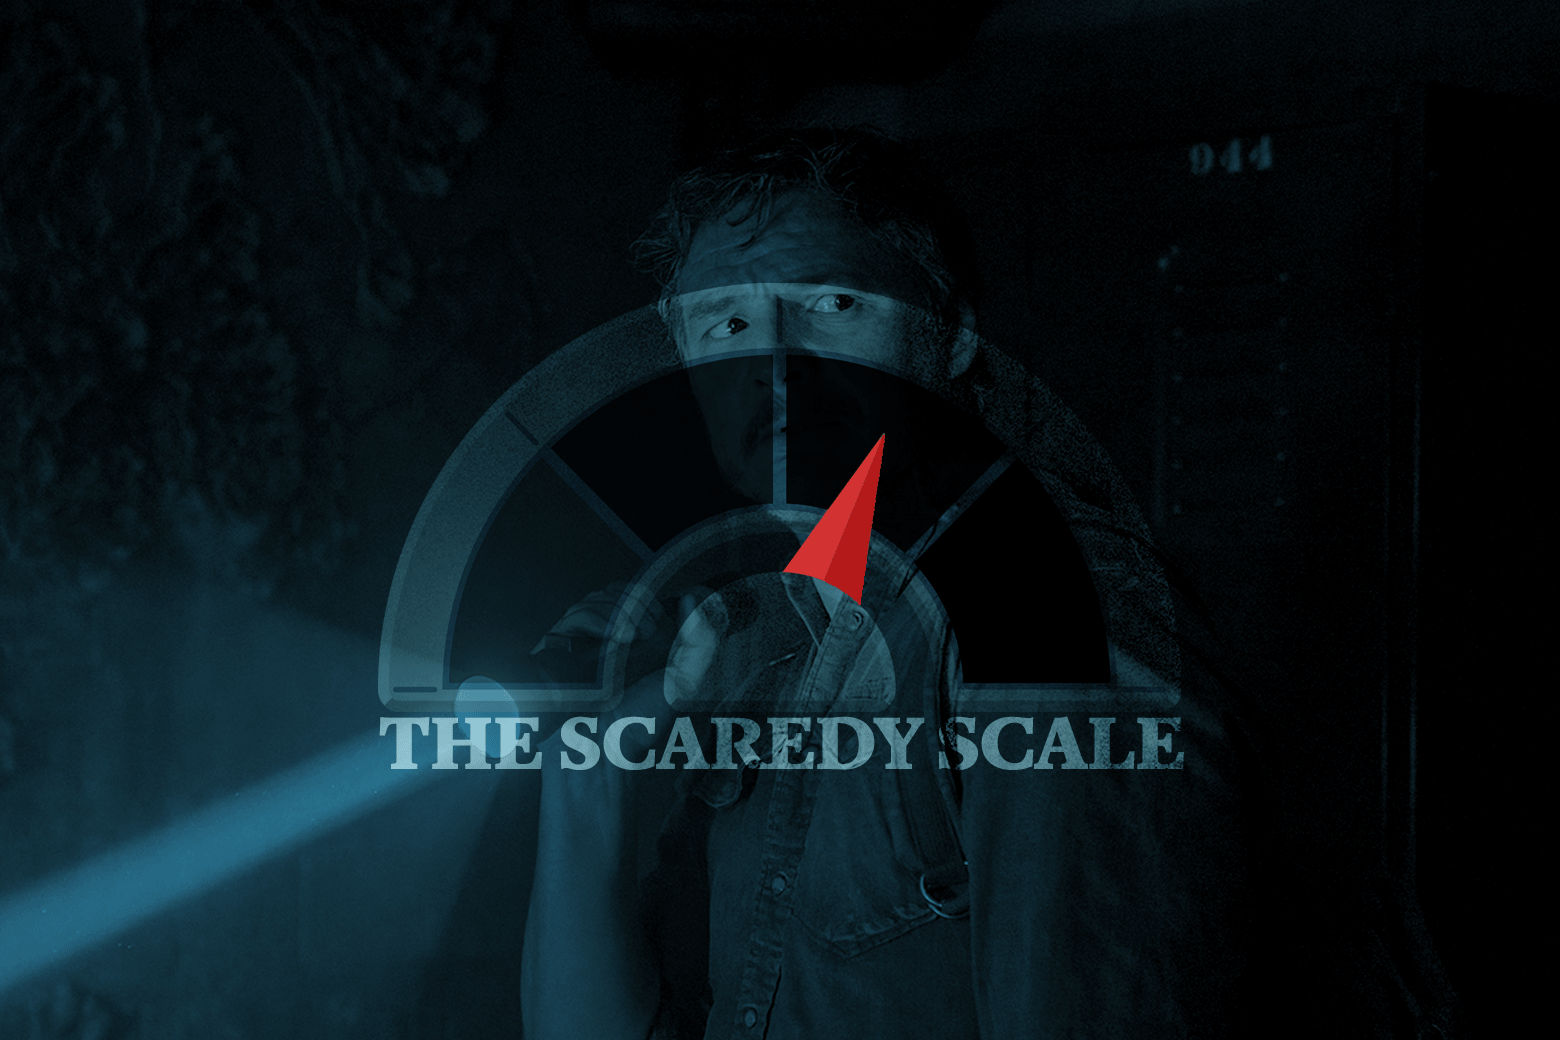 A dark GIF shows Pedro Pascal holding up a flashlight while walking through the dark. In front of him is photoshopped a twitching chart and the words "The Scaredy Scale."